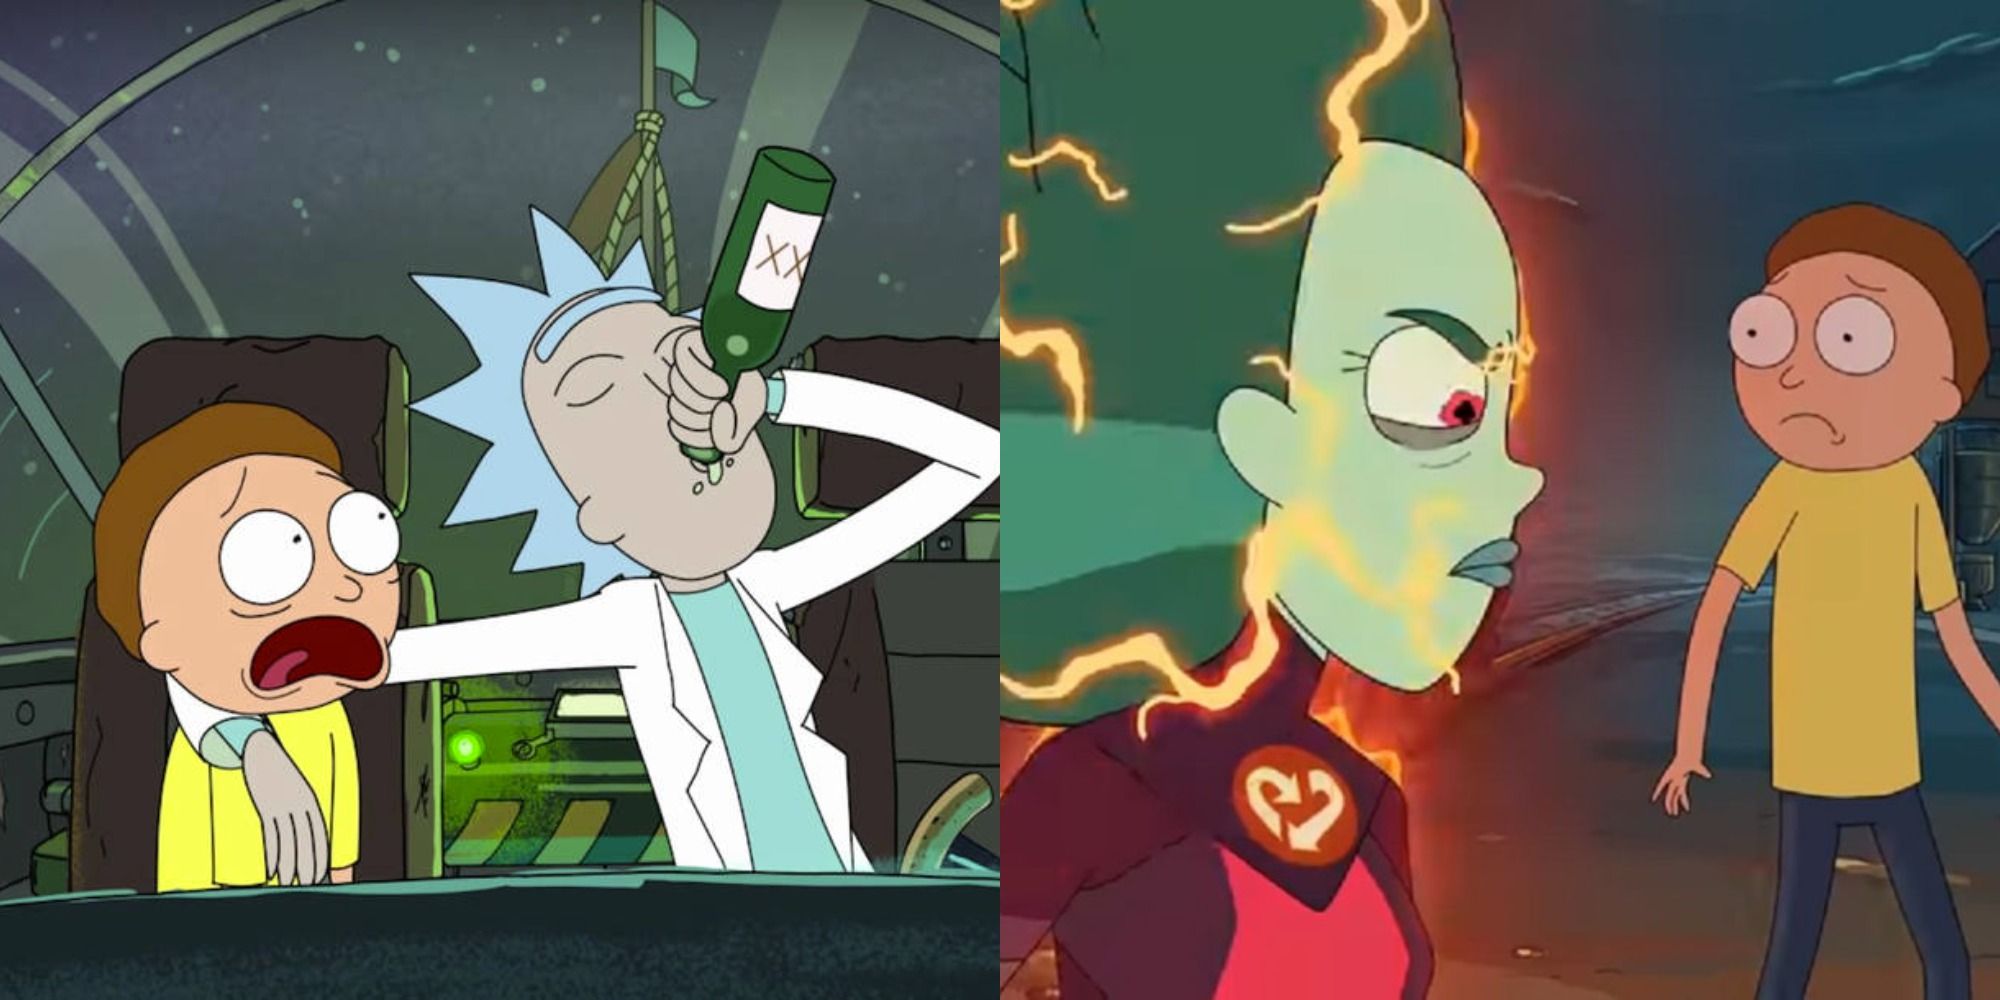 Rick And Morty: Rick drinking on a ship next to Morty; Morty confronting an alien